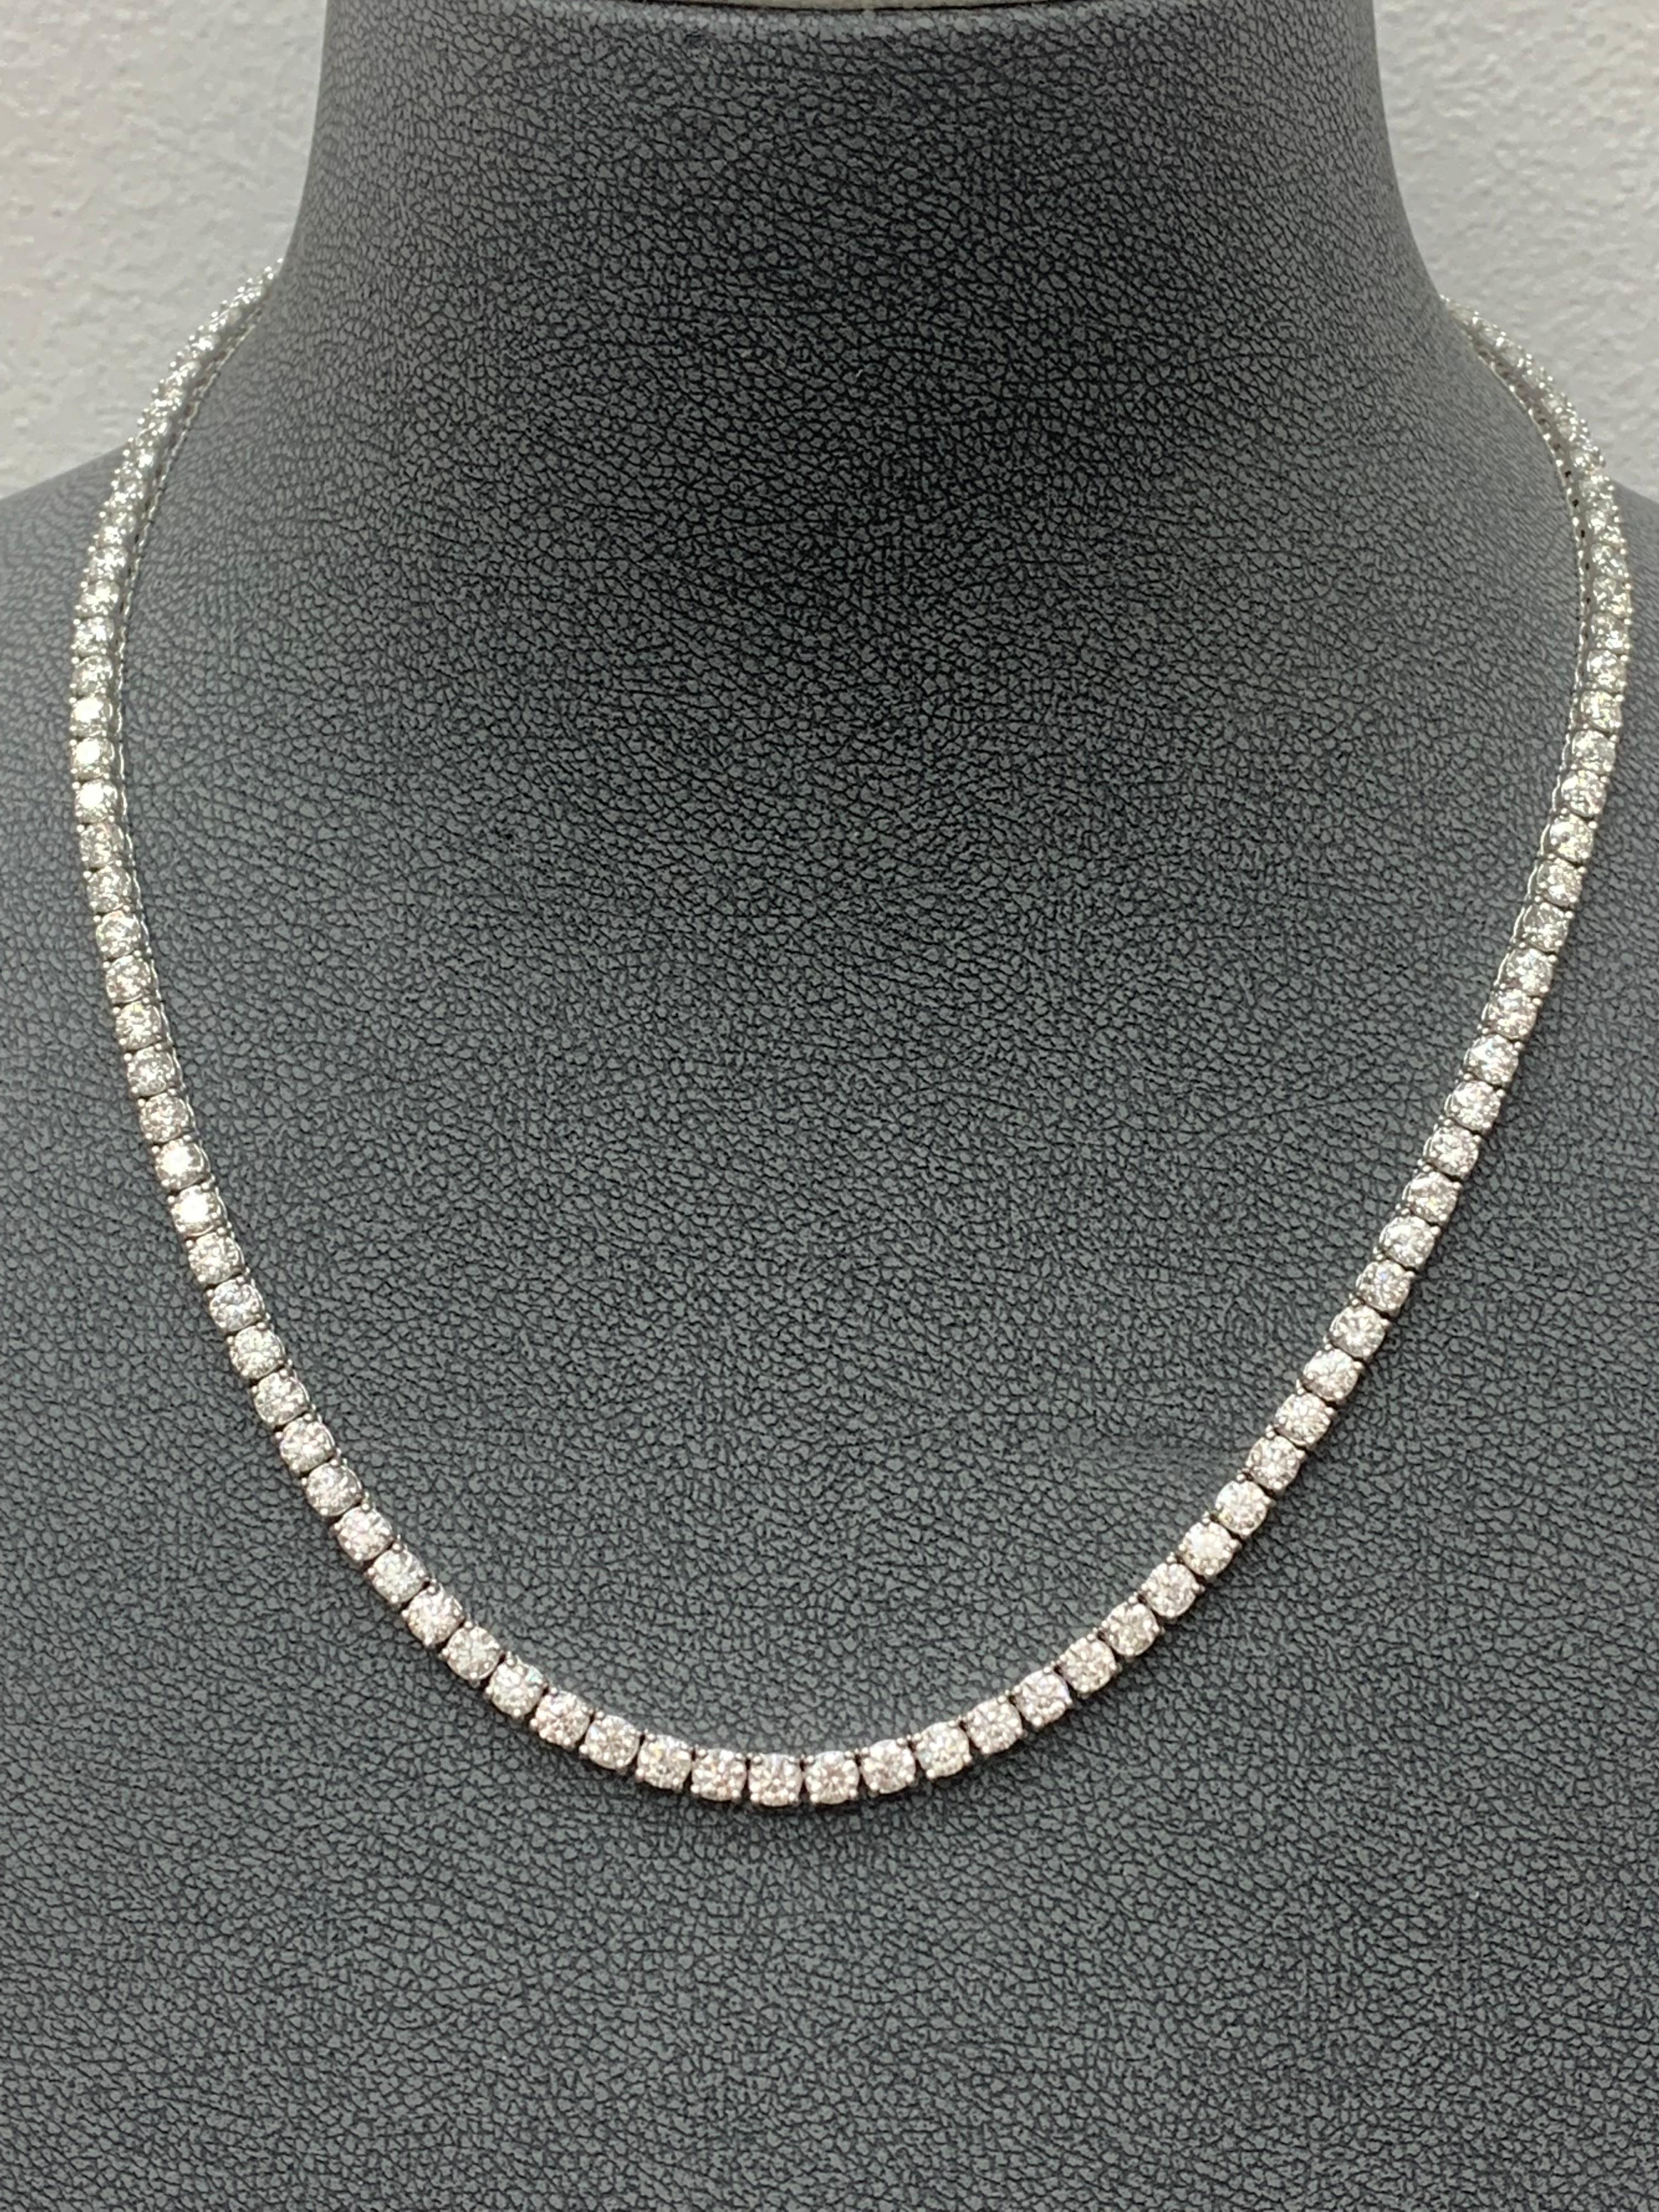 Modern 20.10 Carat Diamond Tennis Necklace in 14K White Gold For Sale